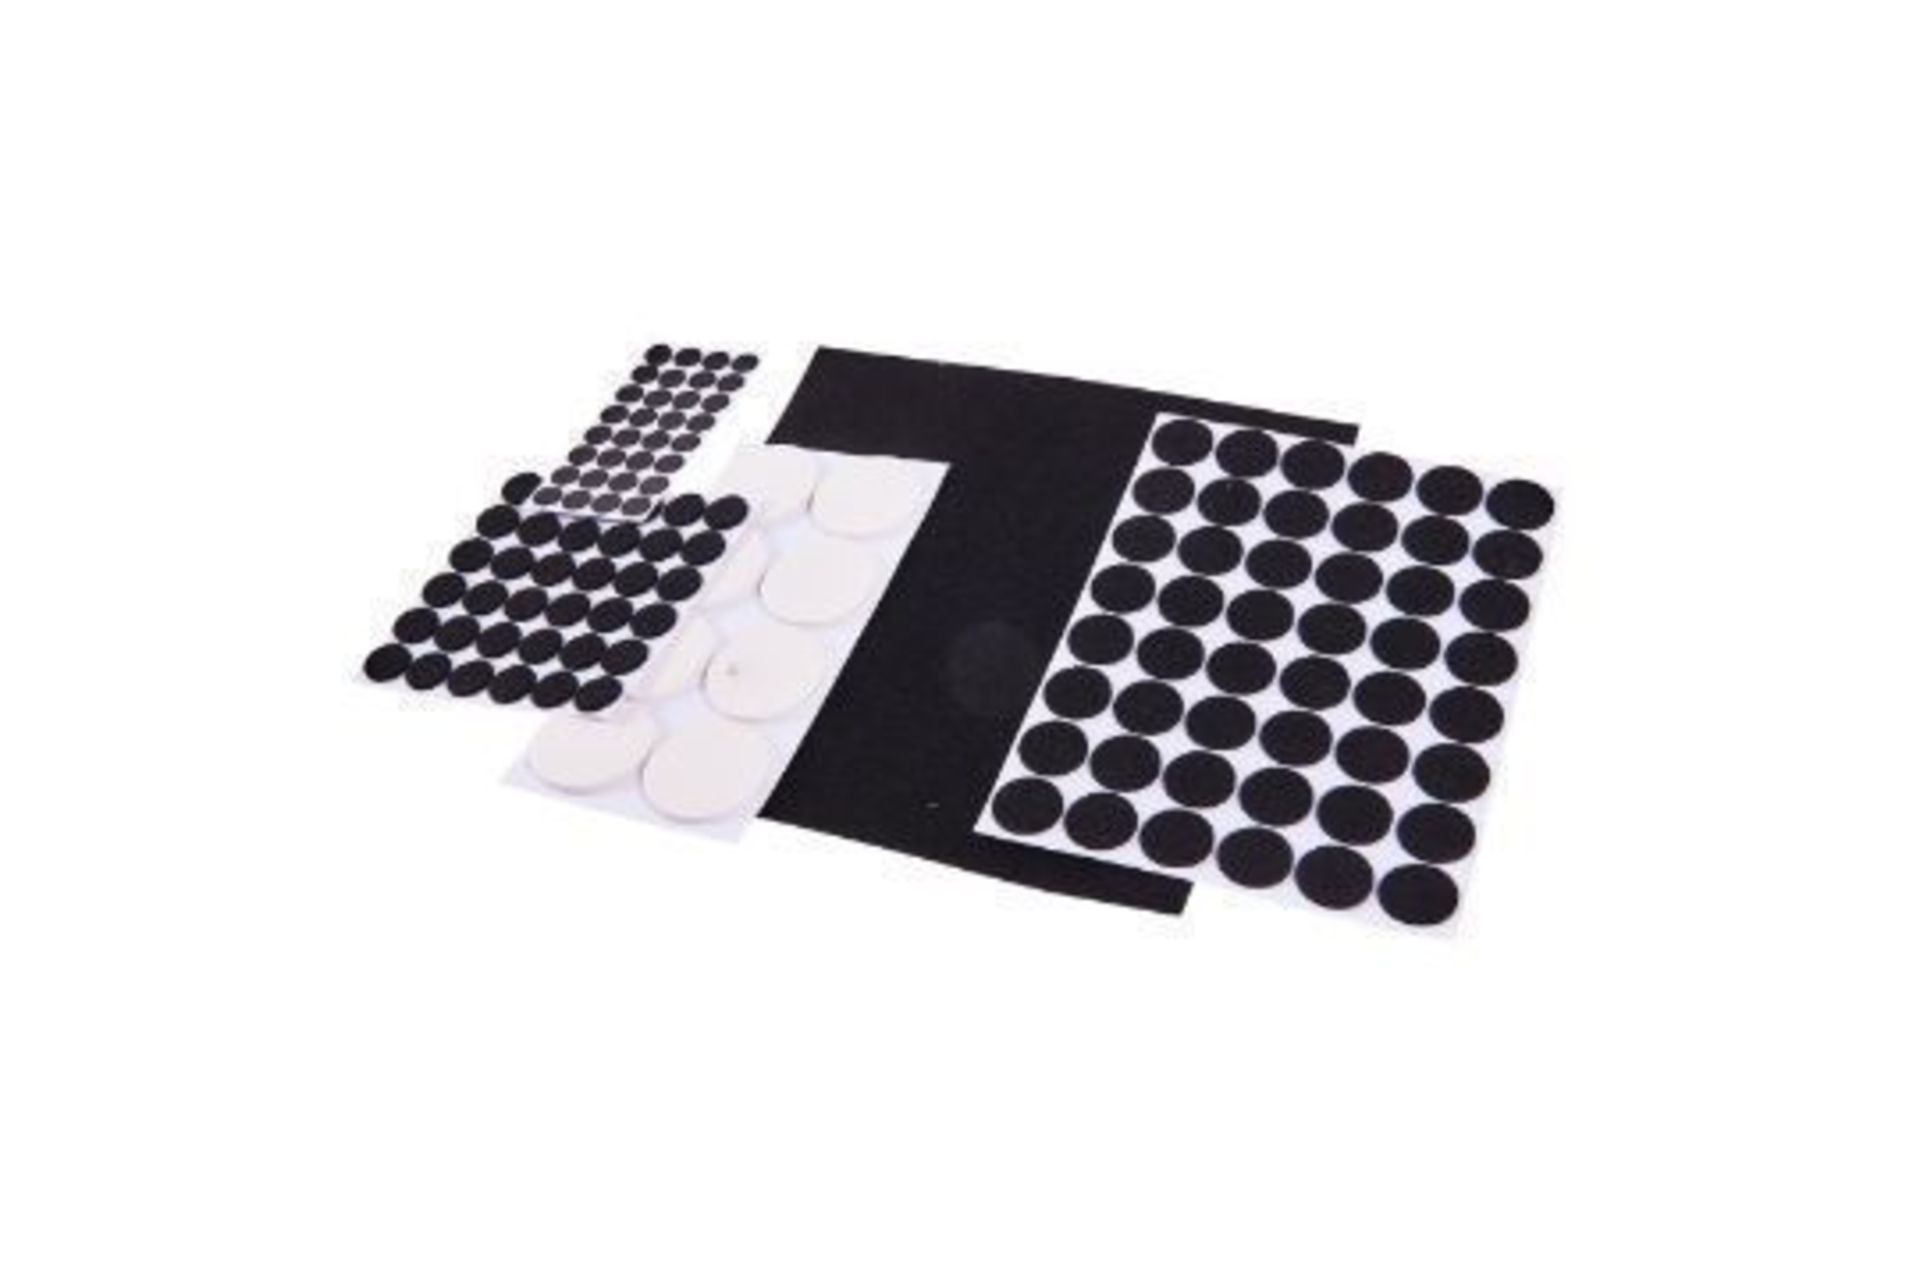 x2 New Packs Of 125 Floor Protection Furniture Pads